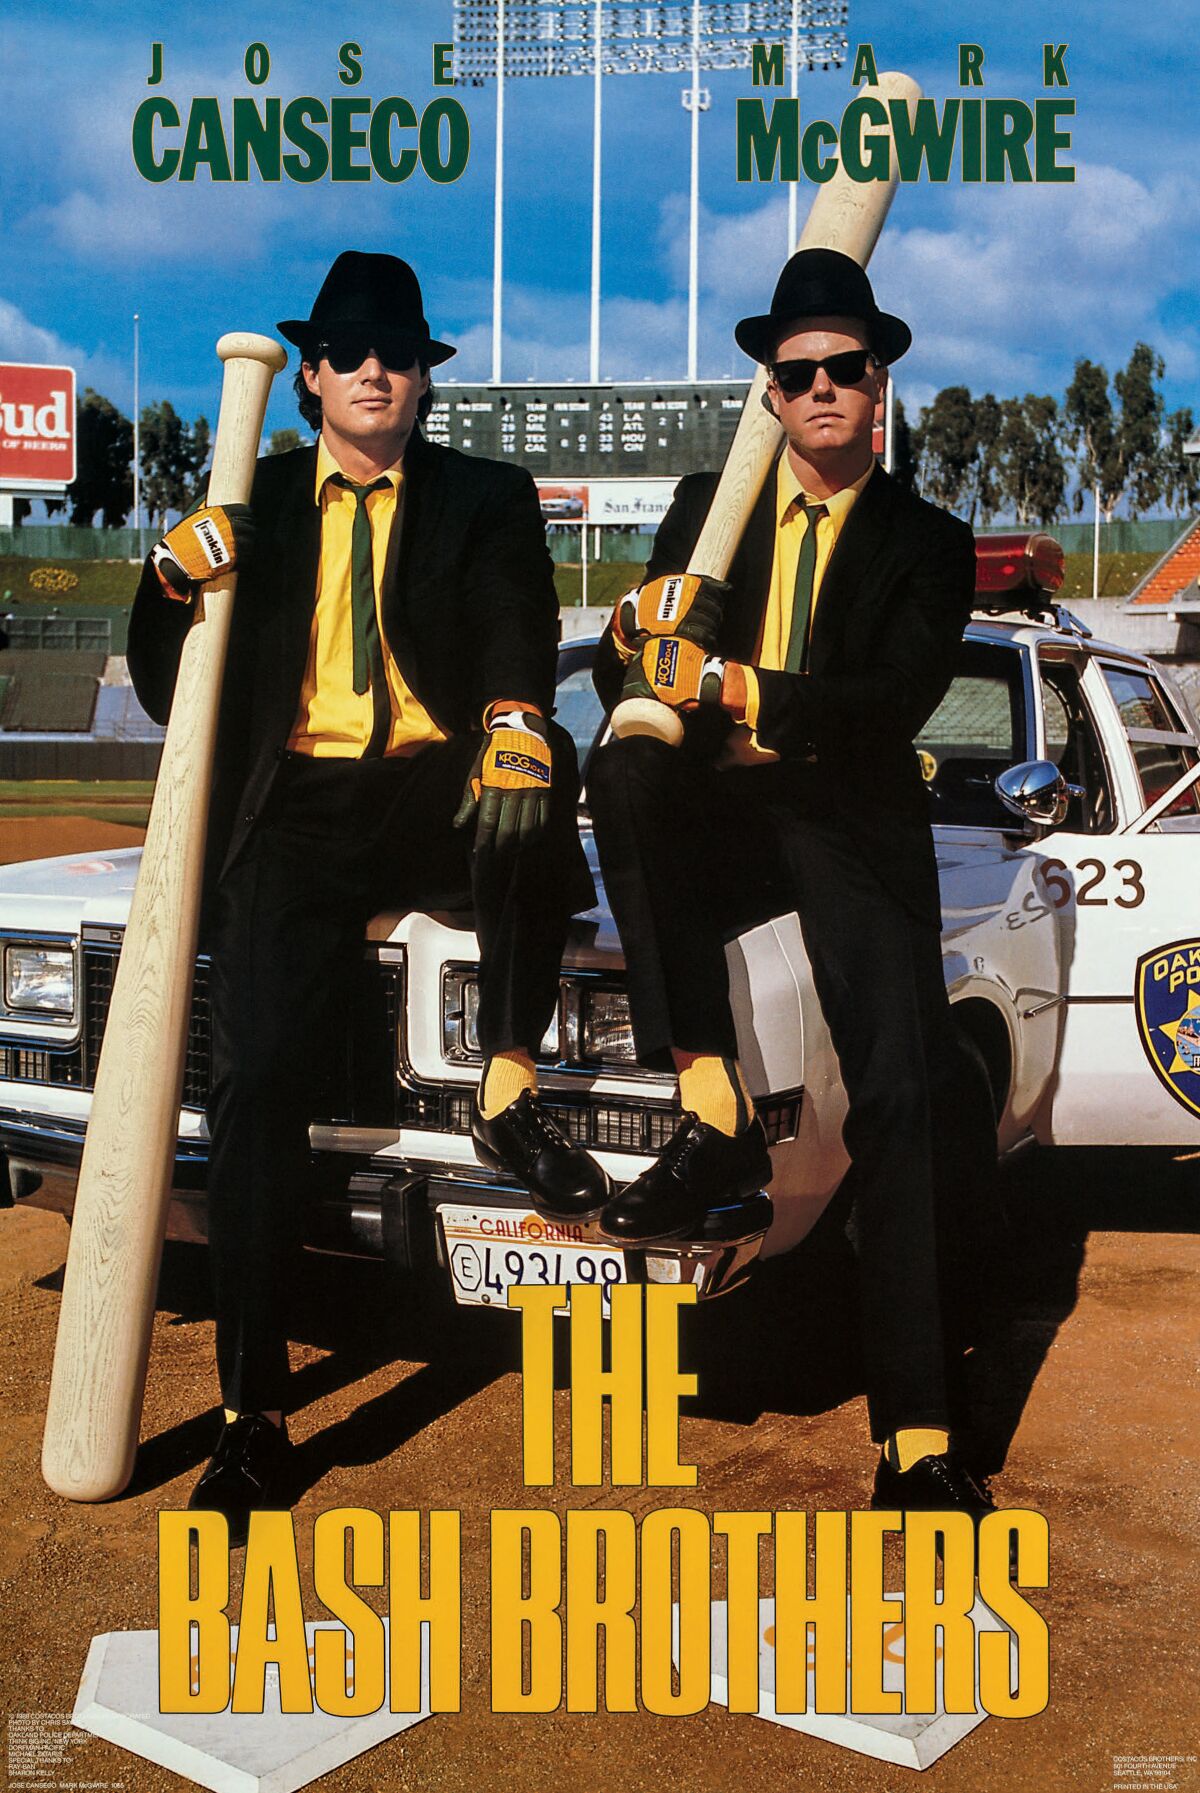 Costacos Brothers poster of Jose Canseco and Mark McGwire, "The Bash Brothers."